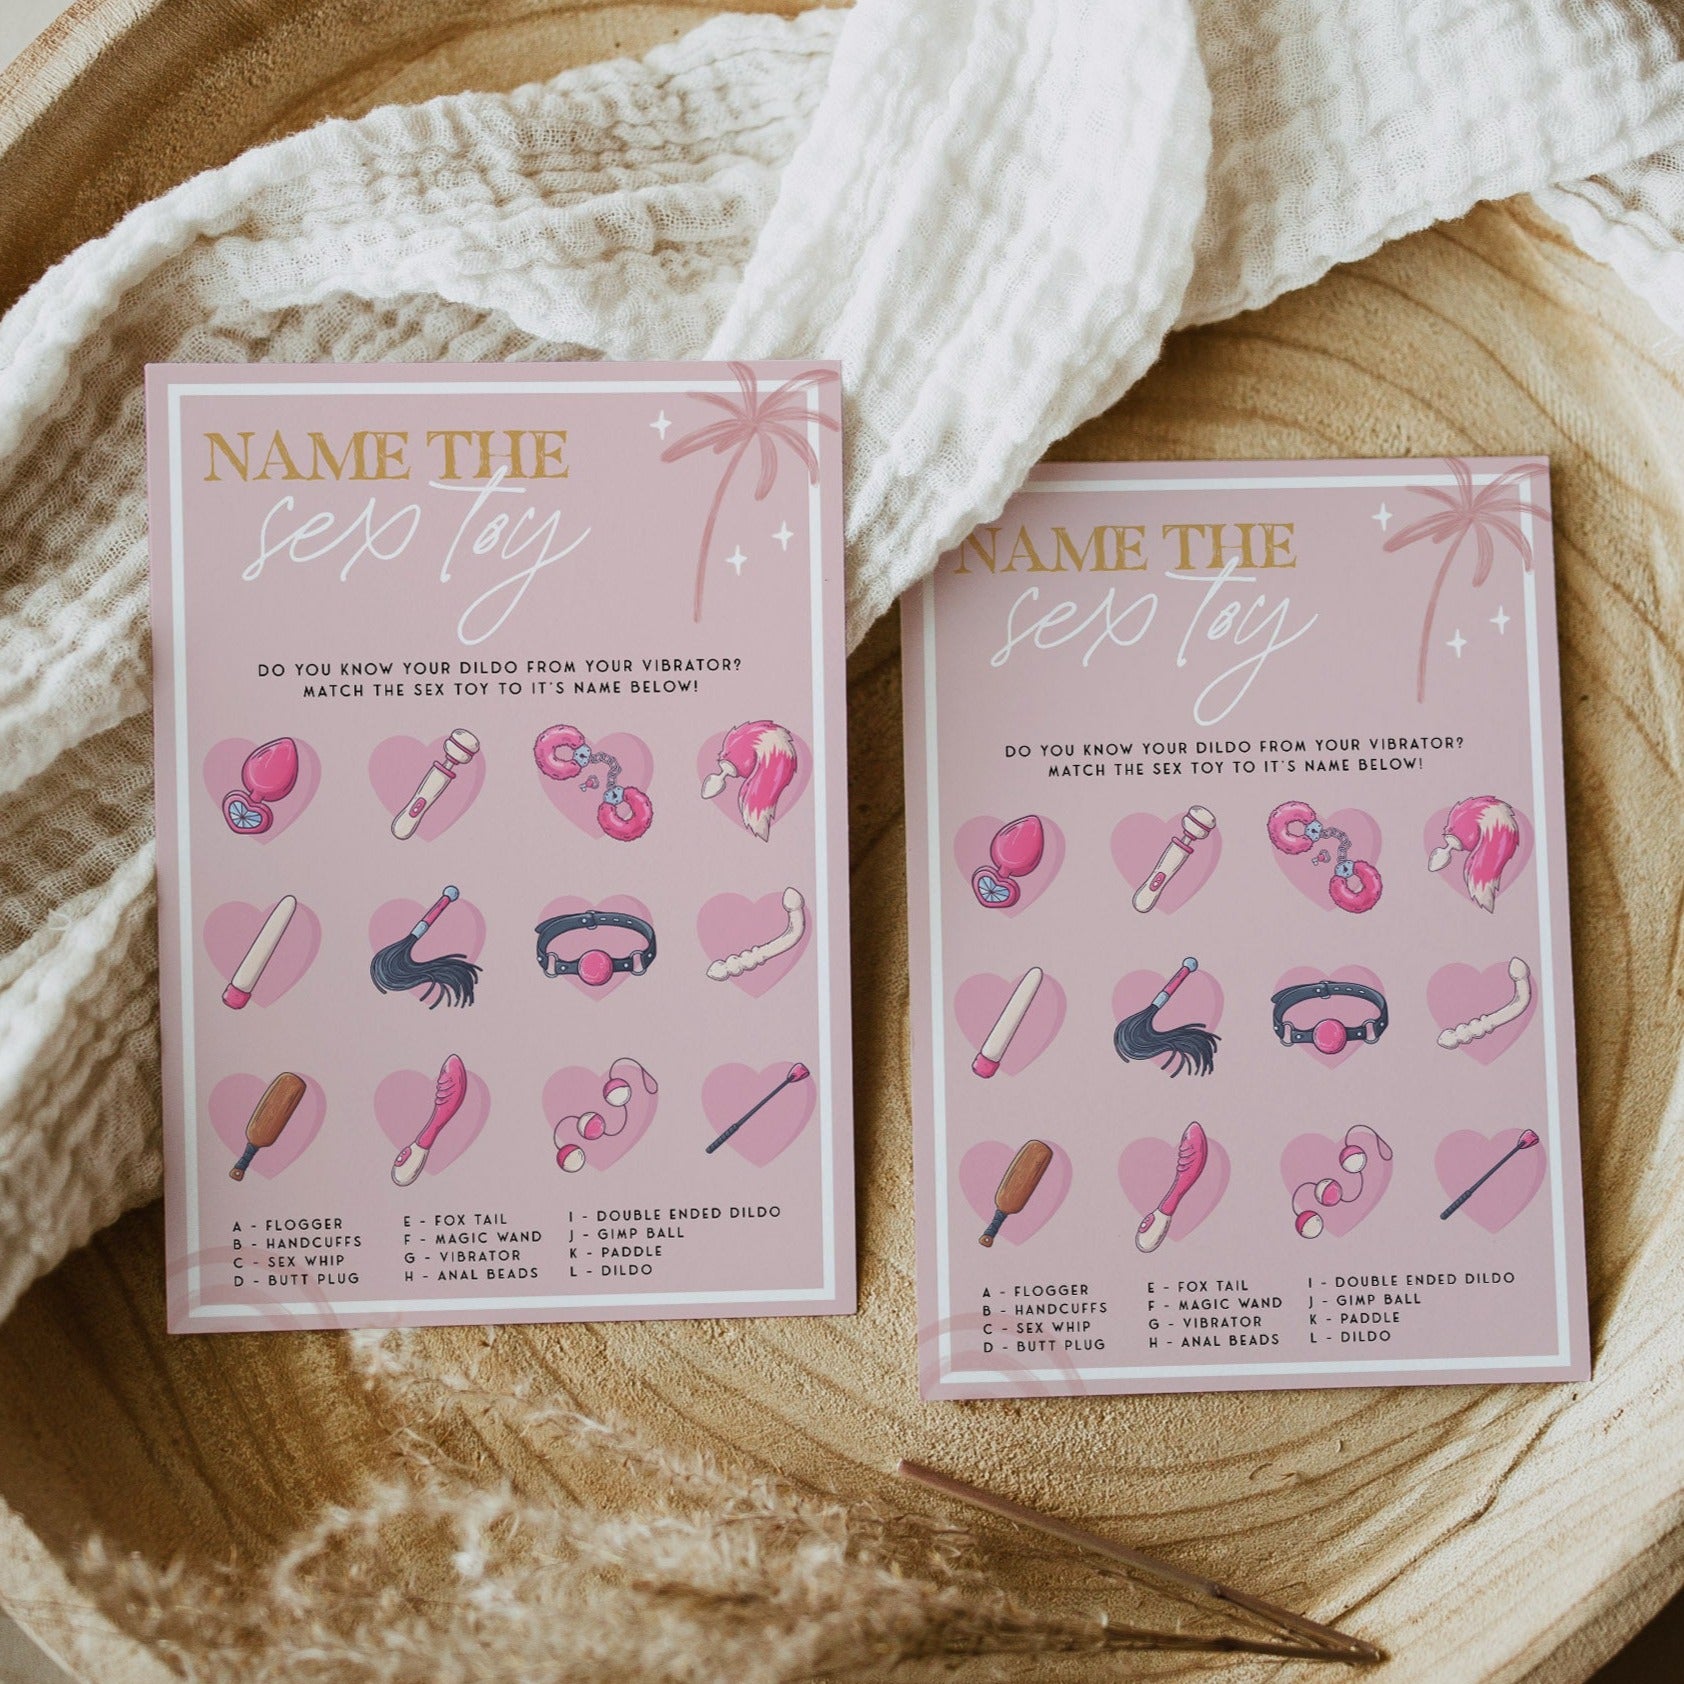 Fully editable and printable bridal shower name the sex toys game with a Palm Springs design. Perfect for a Palm Springs bridal shower themed party